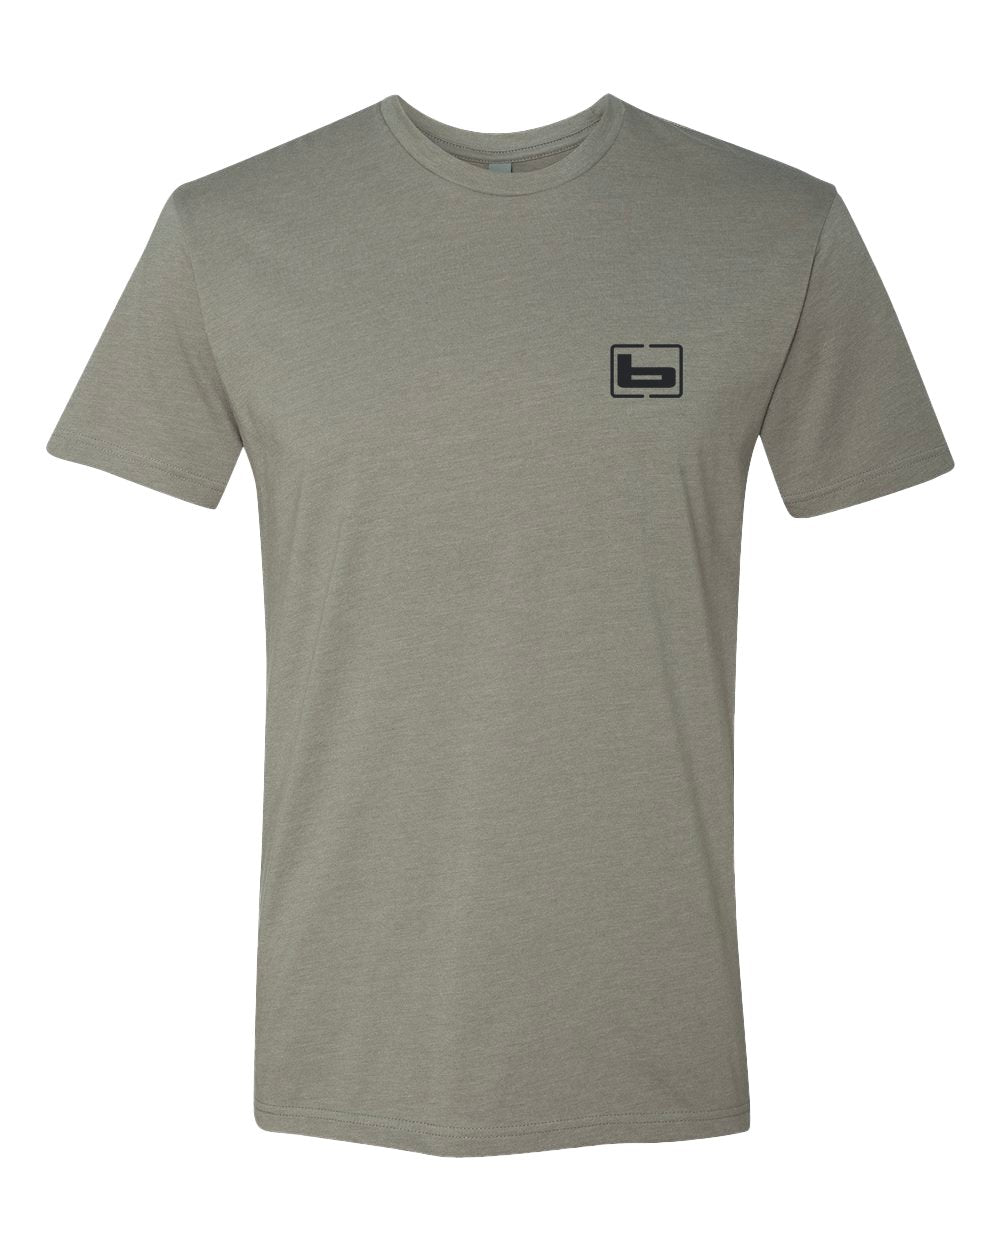 Banded Olympic Bands T-Shirt Grey - Pacific Flyway Supplies